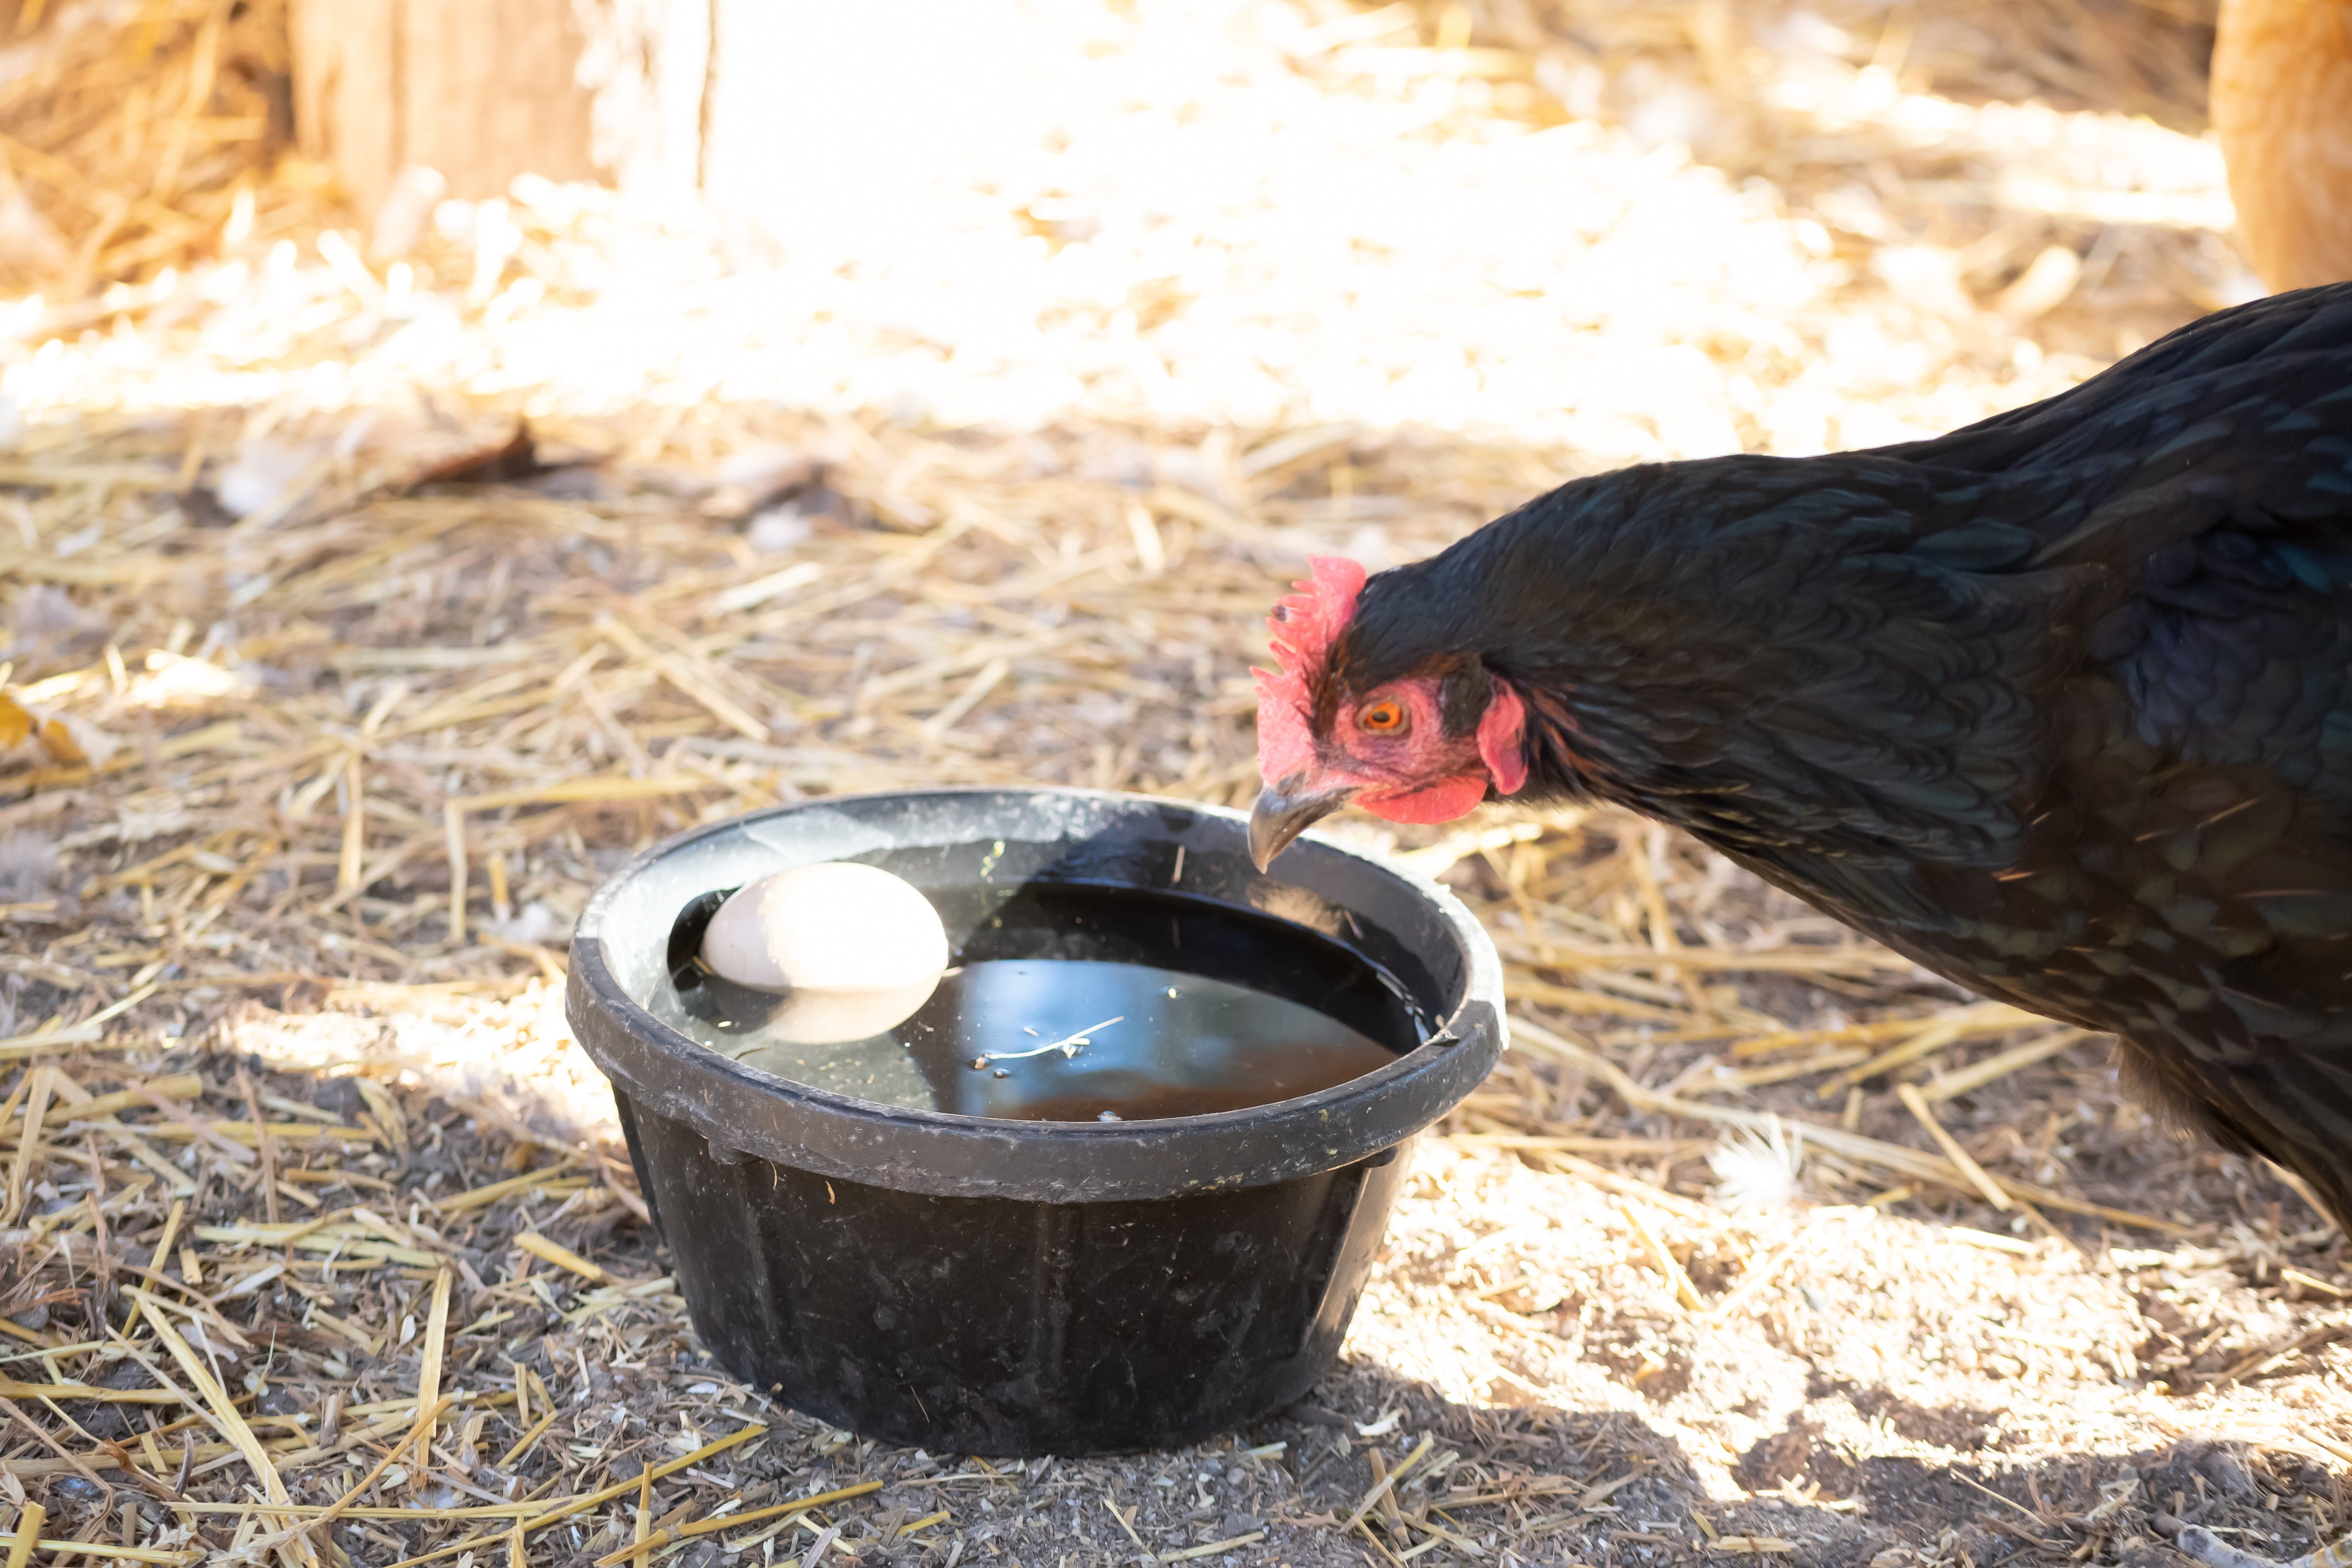 https://cdn.shopify.com/s/files/1/1407/3744/articles/keep_your_chickens_water_from_freezing_black_bowl.jpg?v=1640626582